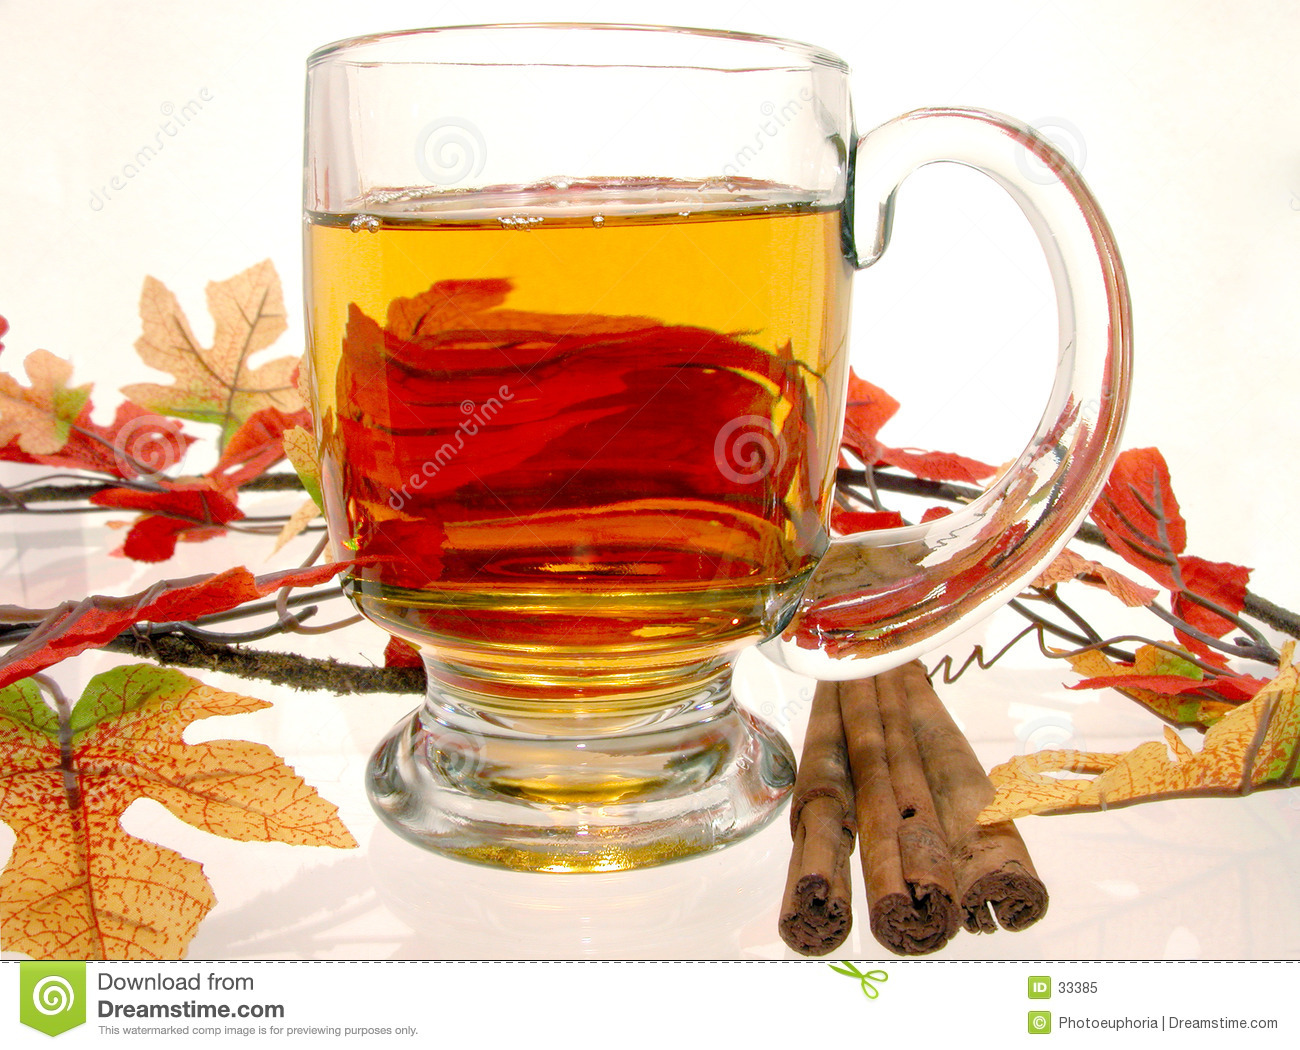 Glass Mug Of Hot Apple Cider Surrounded By Fall Decorations And